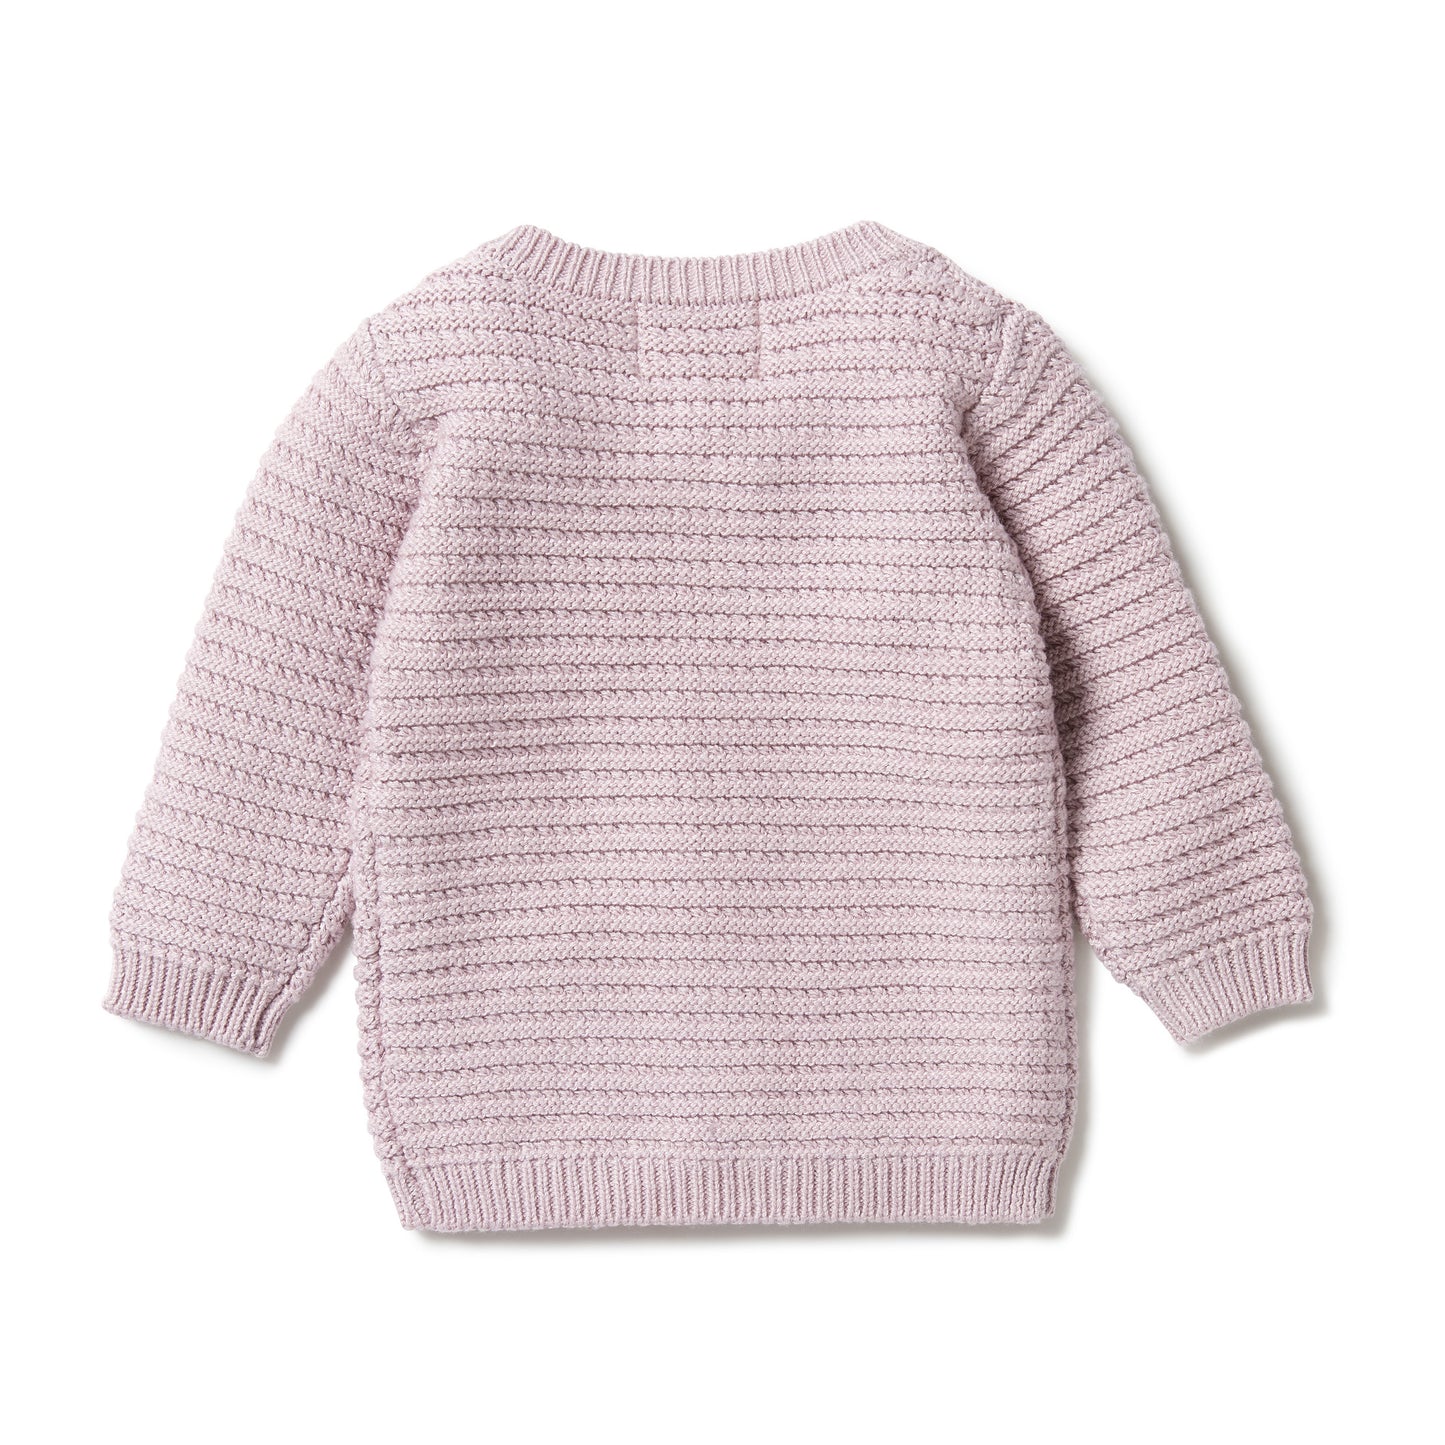 Wilson & Frenchy Knitted Spot Jumper - Lilac Ash